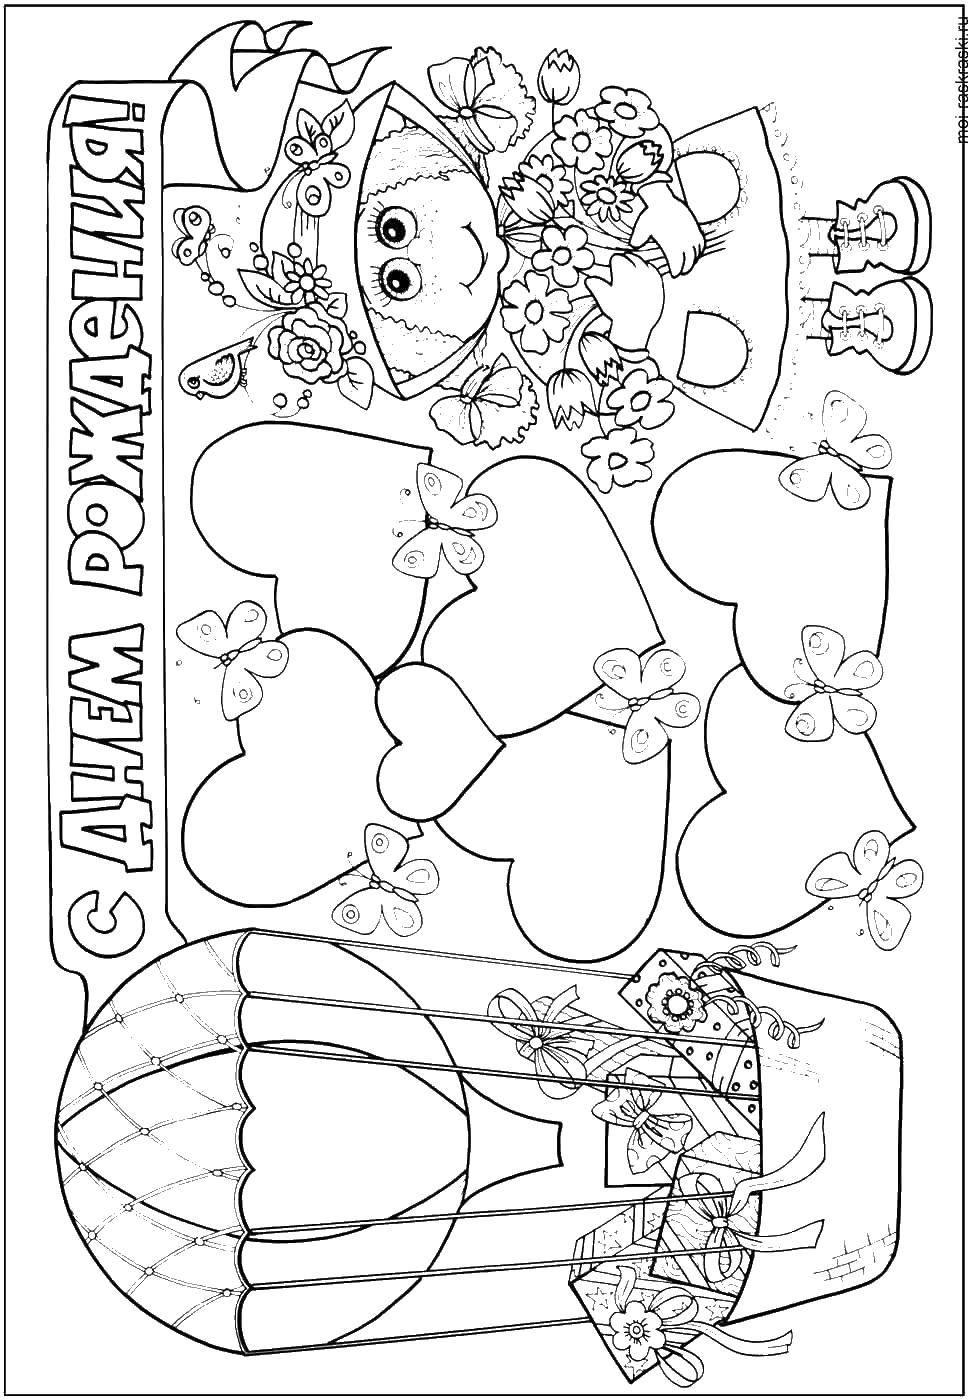 Coloring Girl with flowers. Category People. Tags:  postcard, girl.